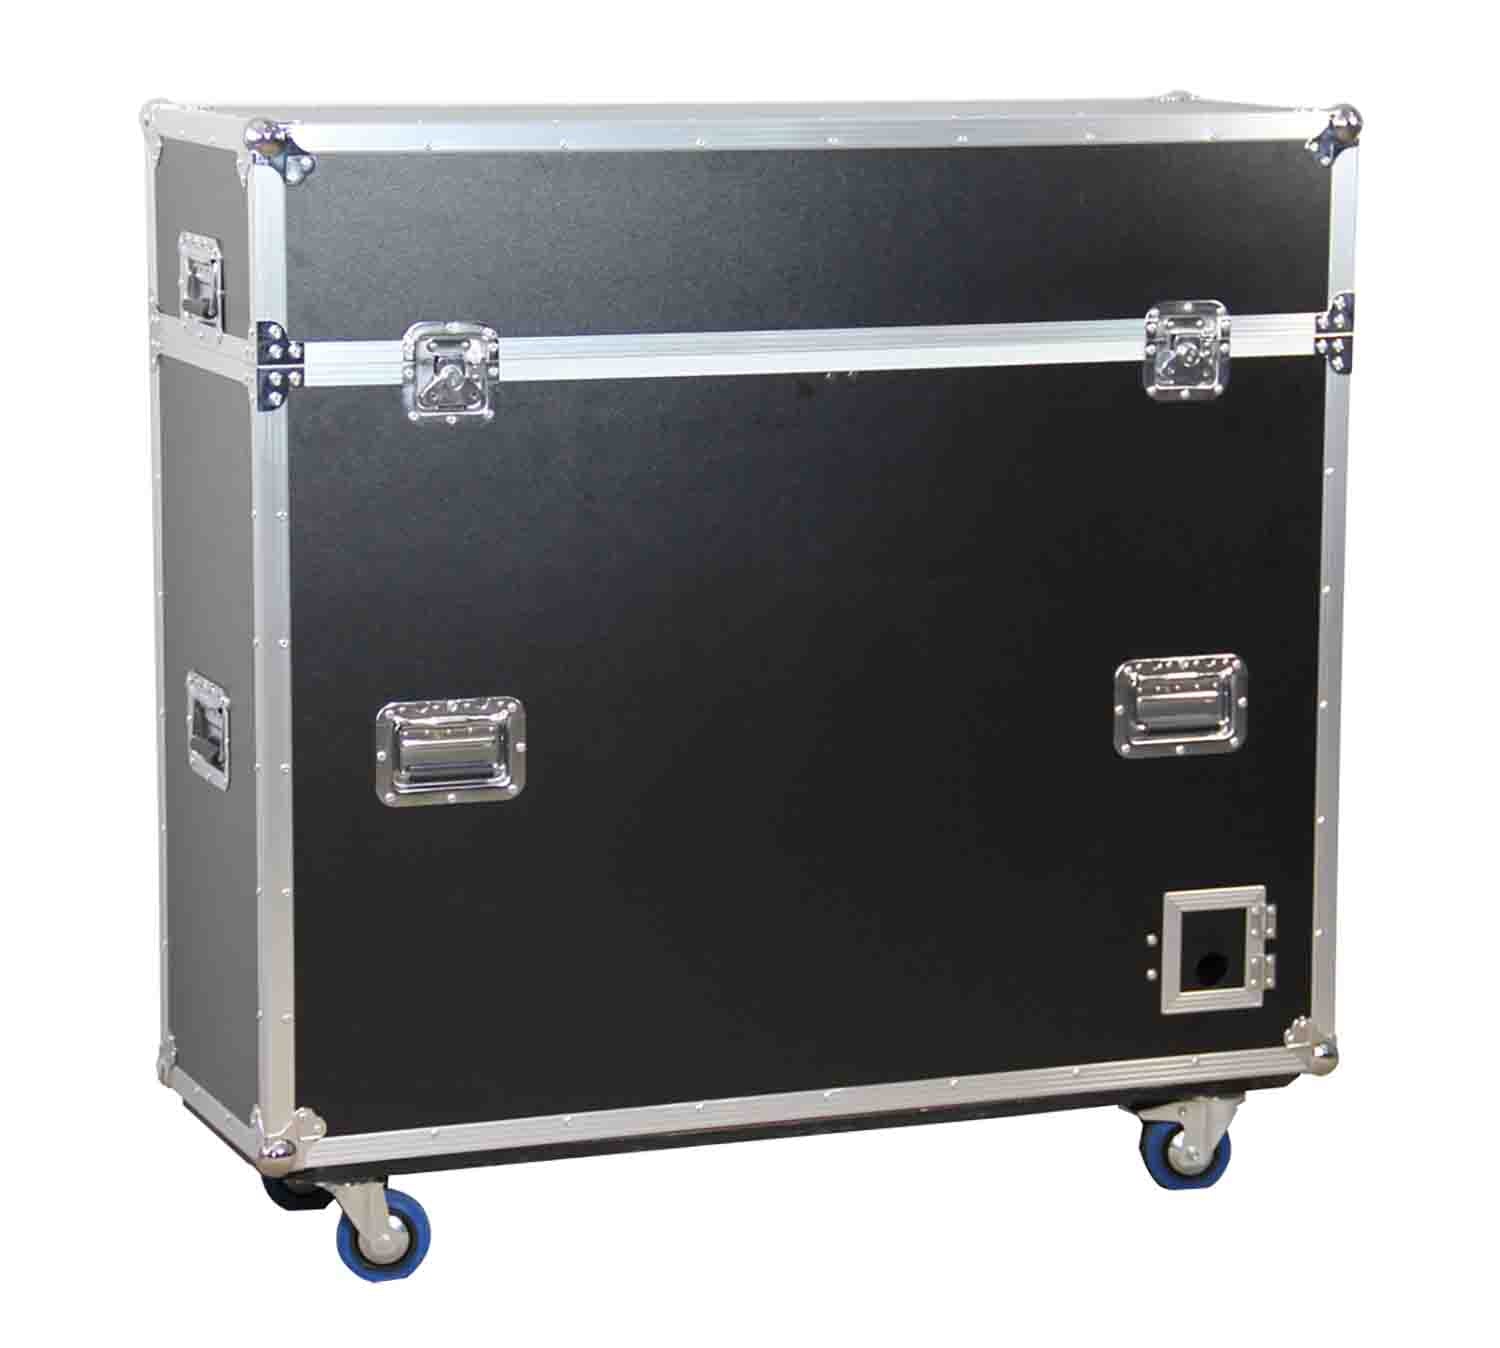 Gator Cases G-TOUR ELIFT 55 Electric Lift Road Case for 55″ LCD or Plasma Screen - Hollywood DJ